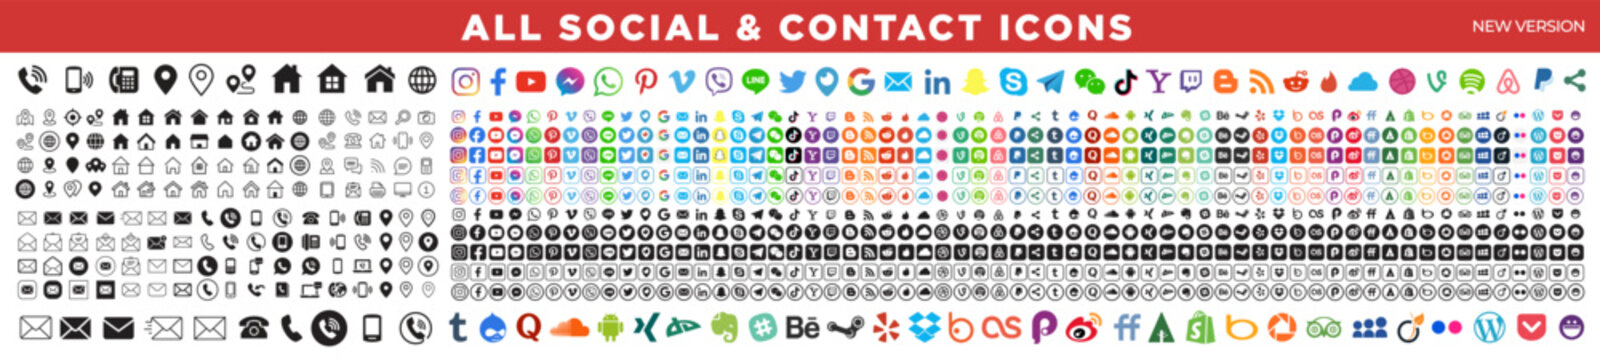 Collection icons : social, contact, business, apps